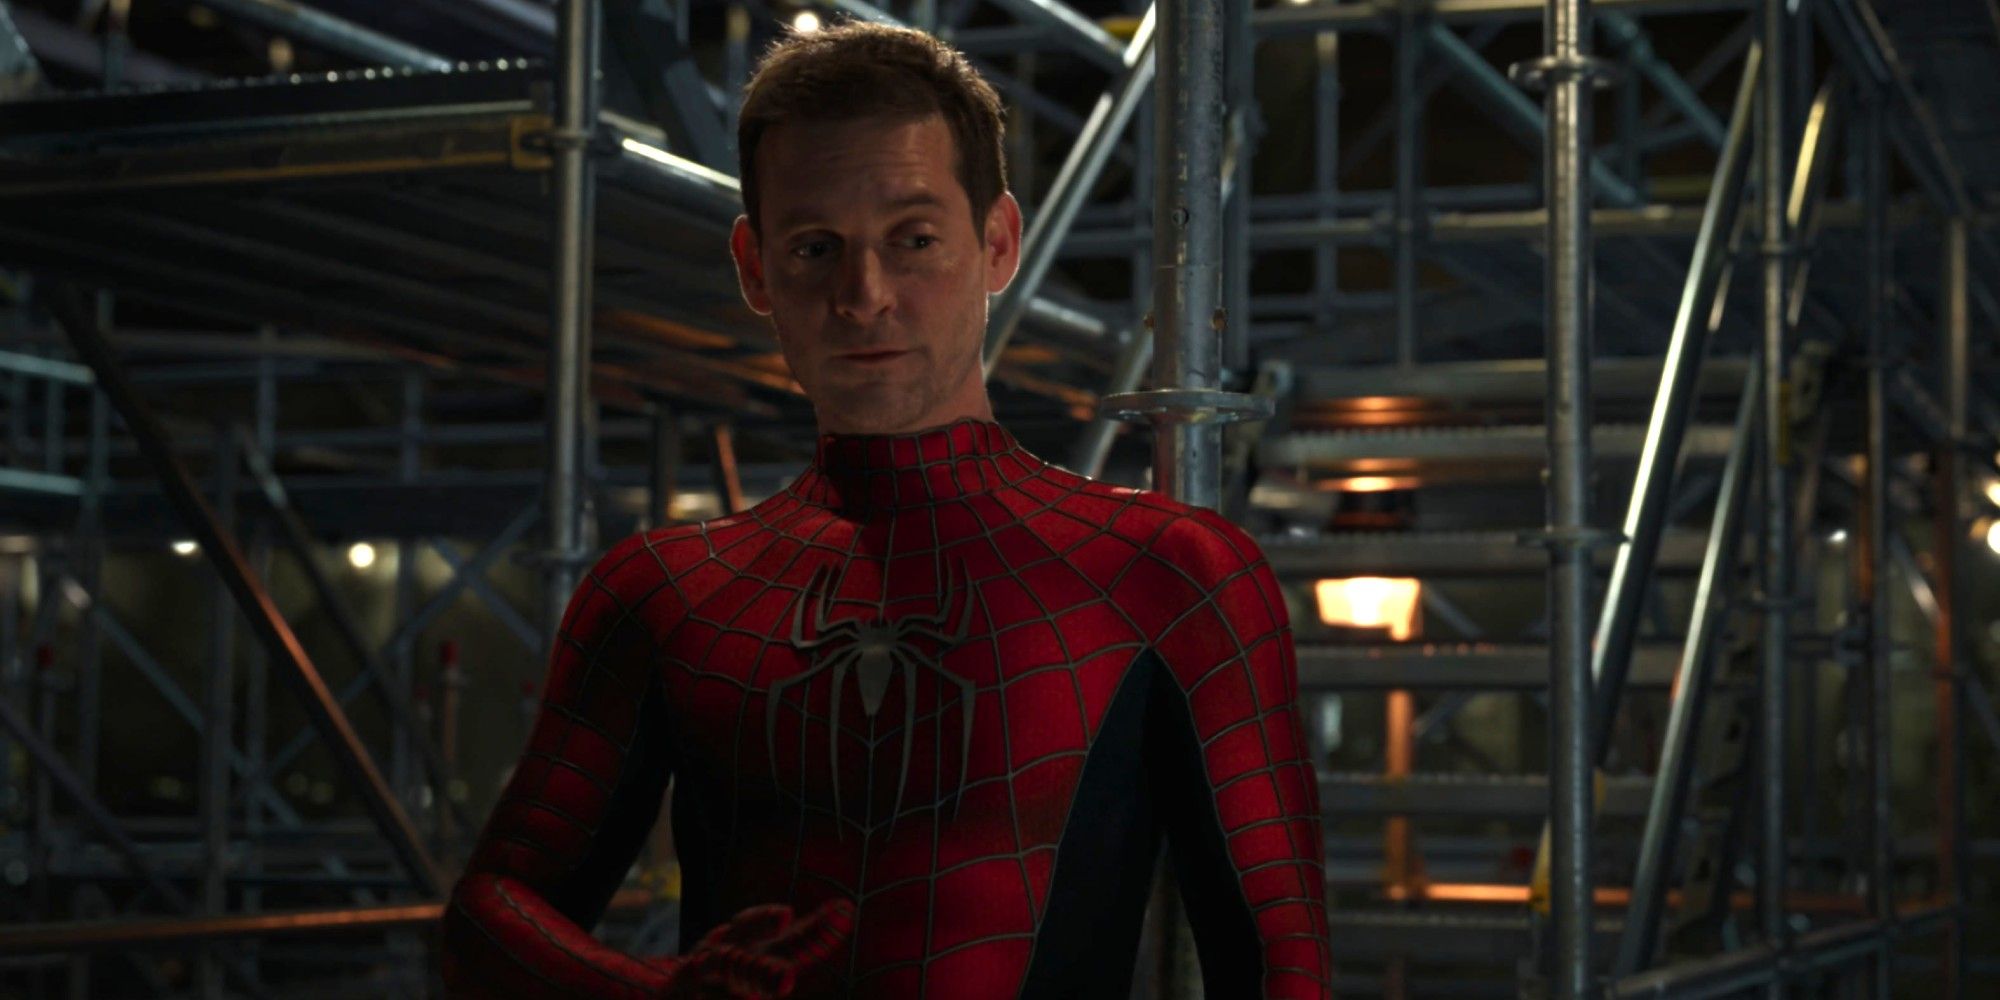 Tobey Maguire appears in Spider-Man: No Way Home.